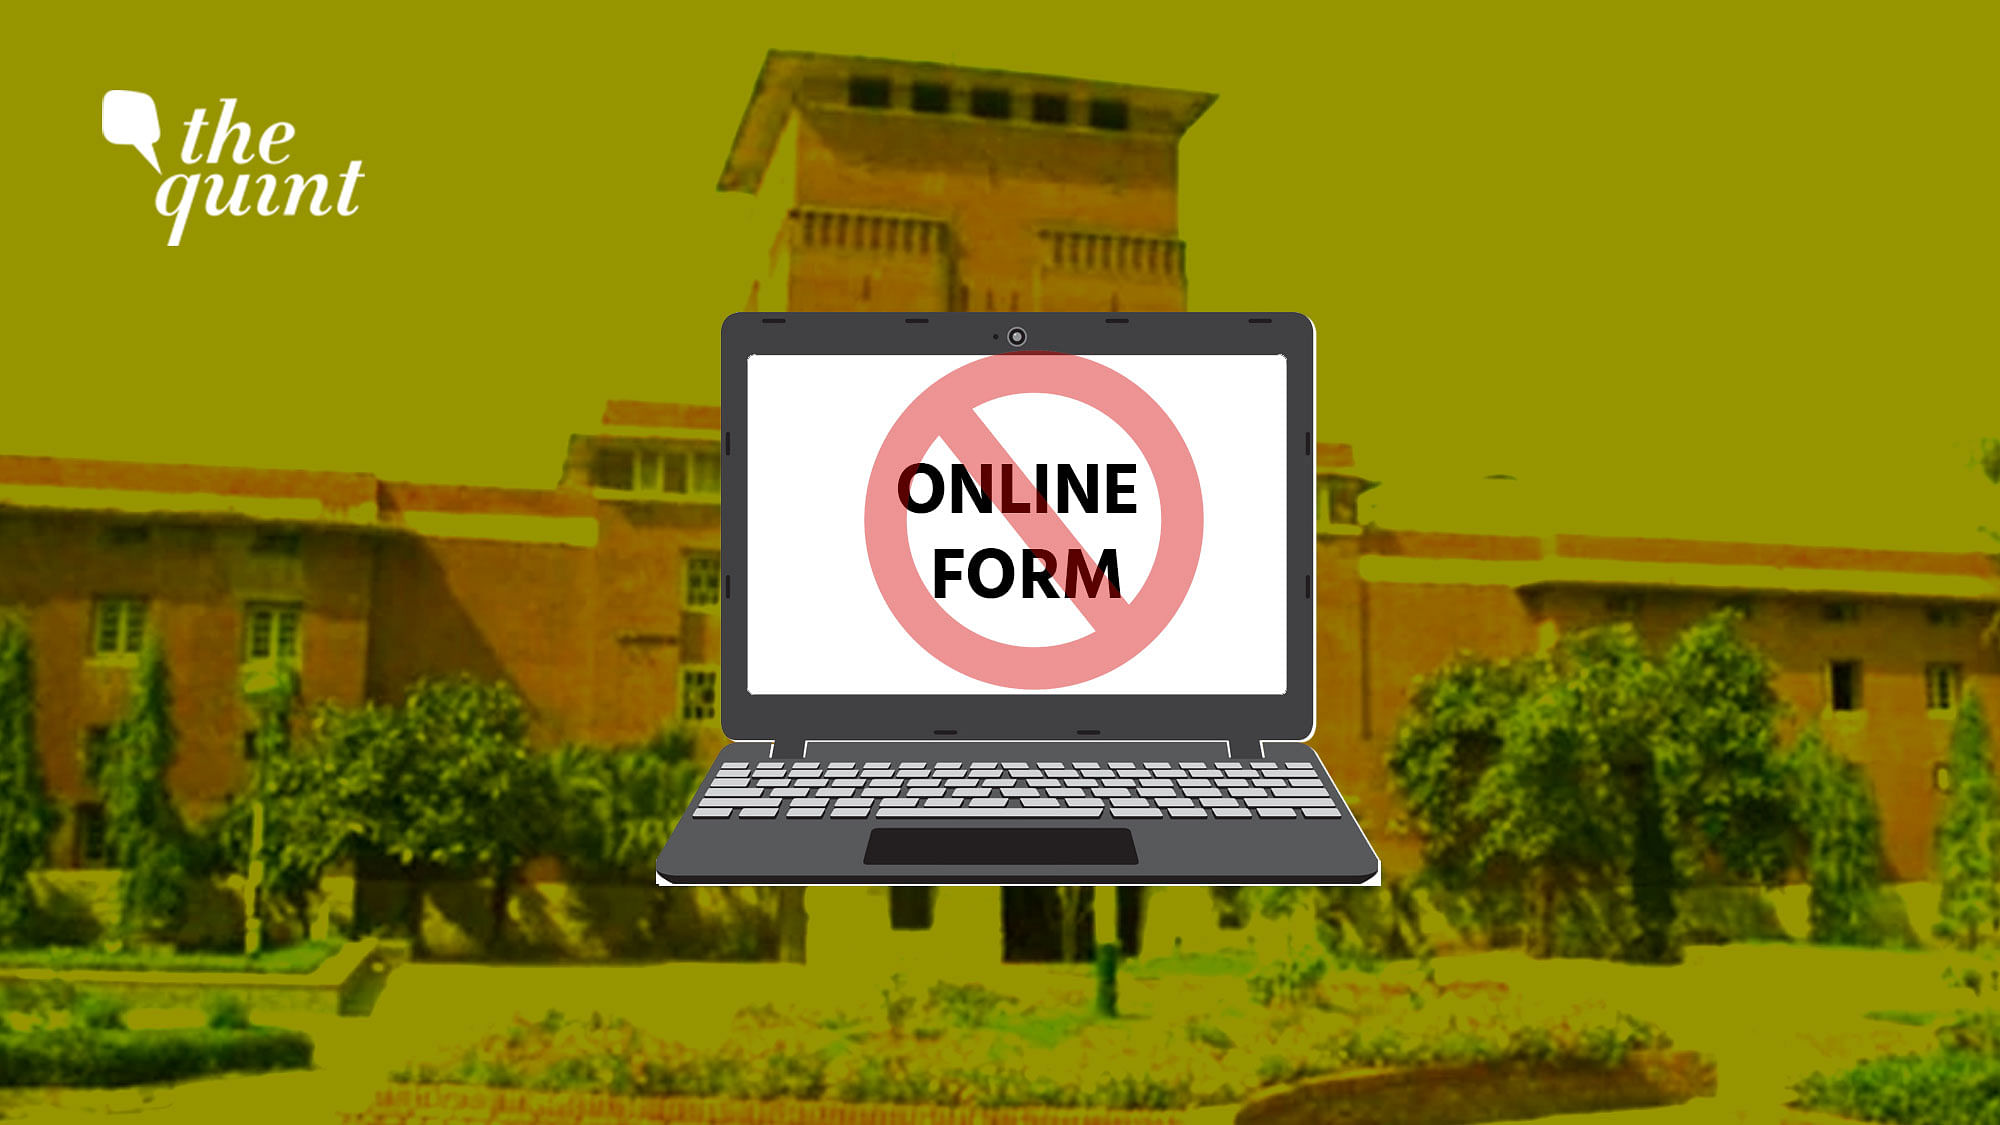 Several DU students say they have been unable to fill or even access the examination form online.